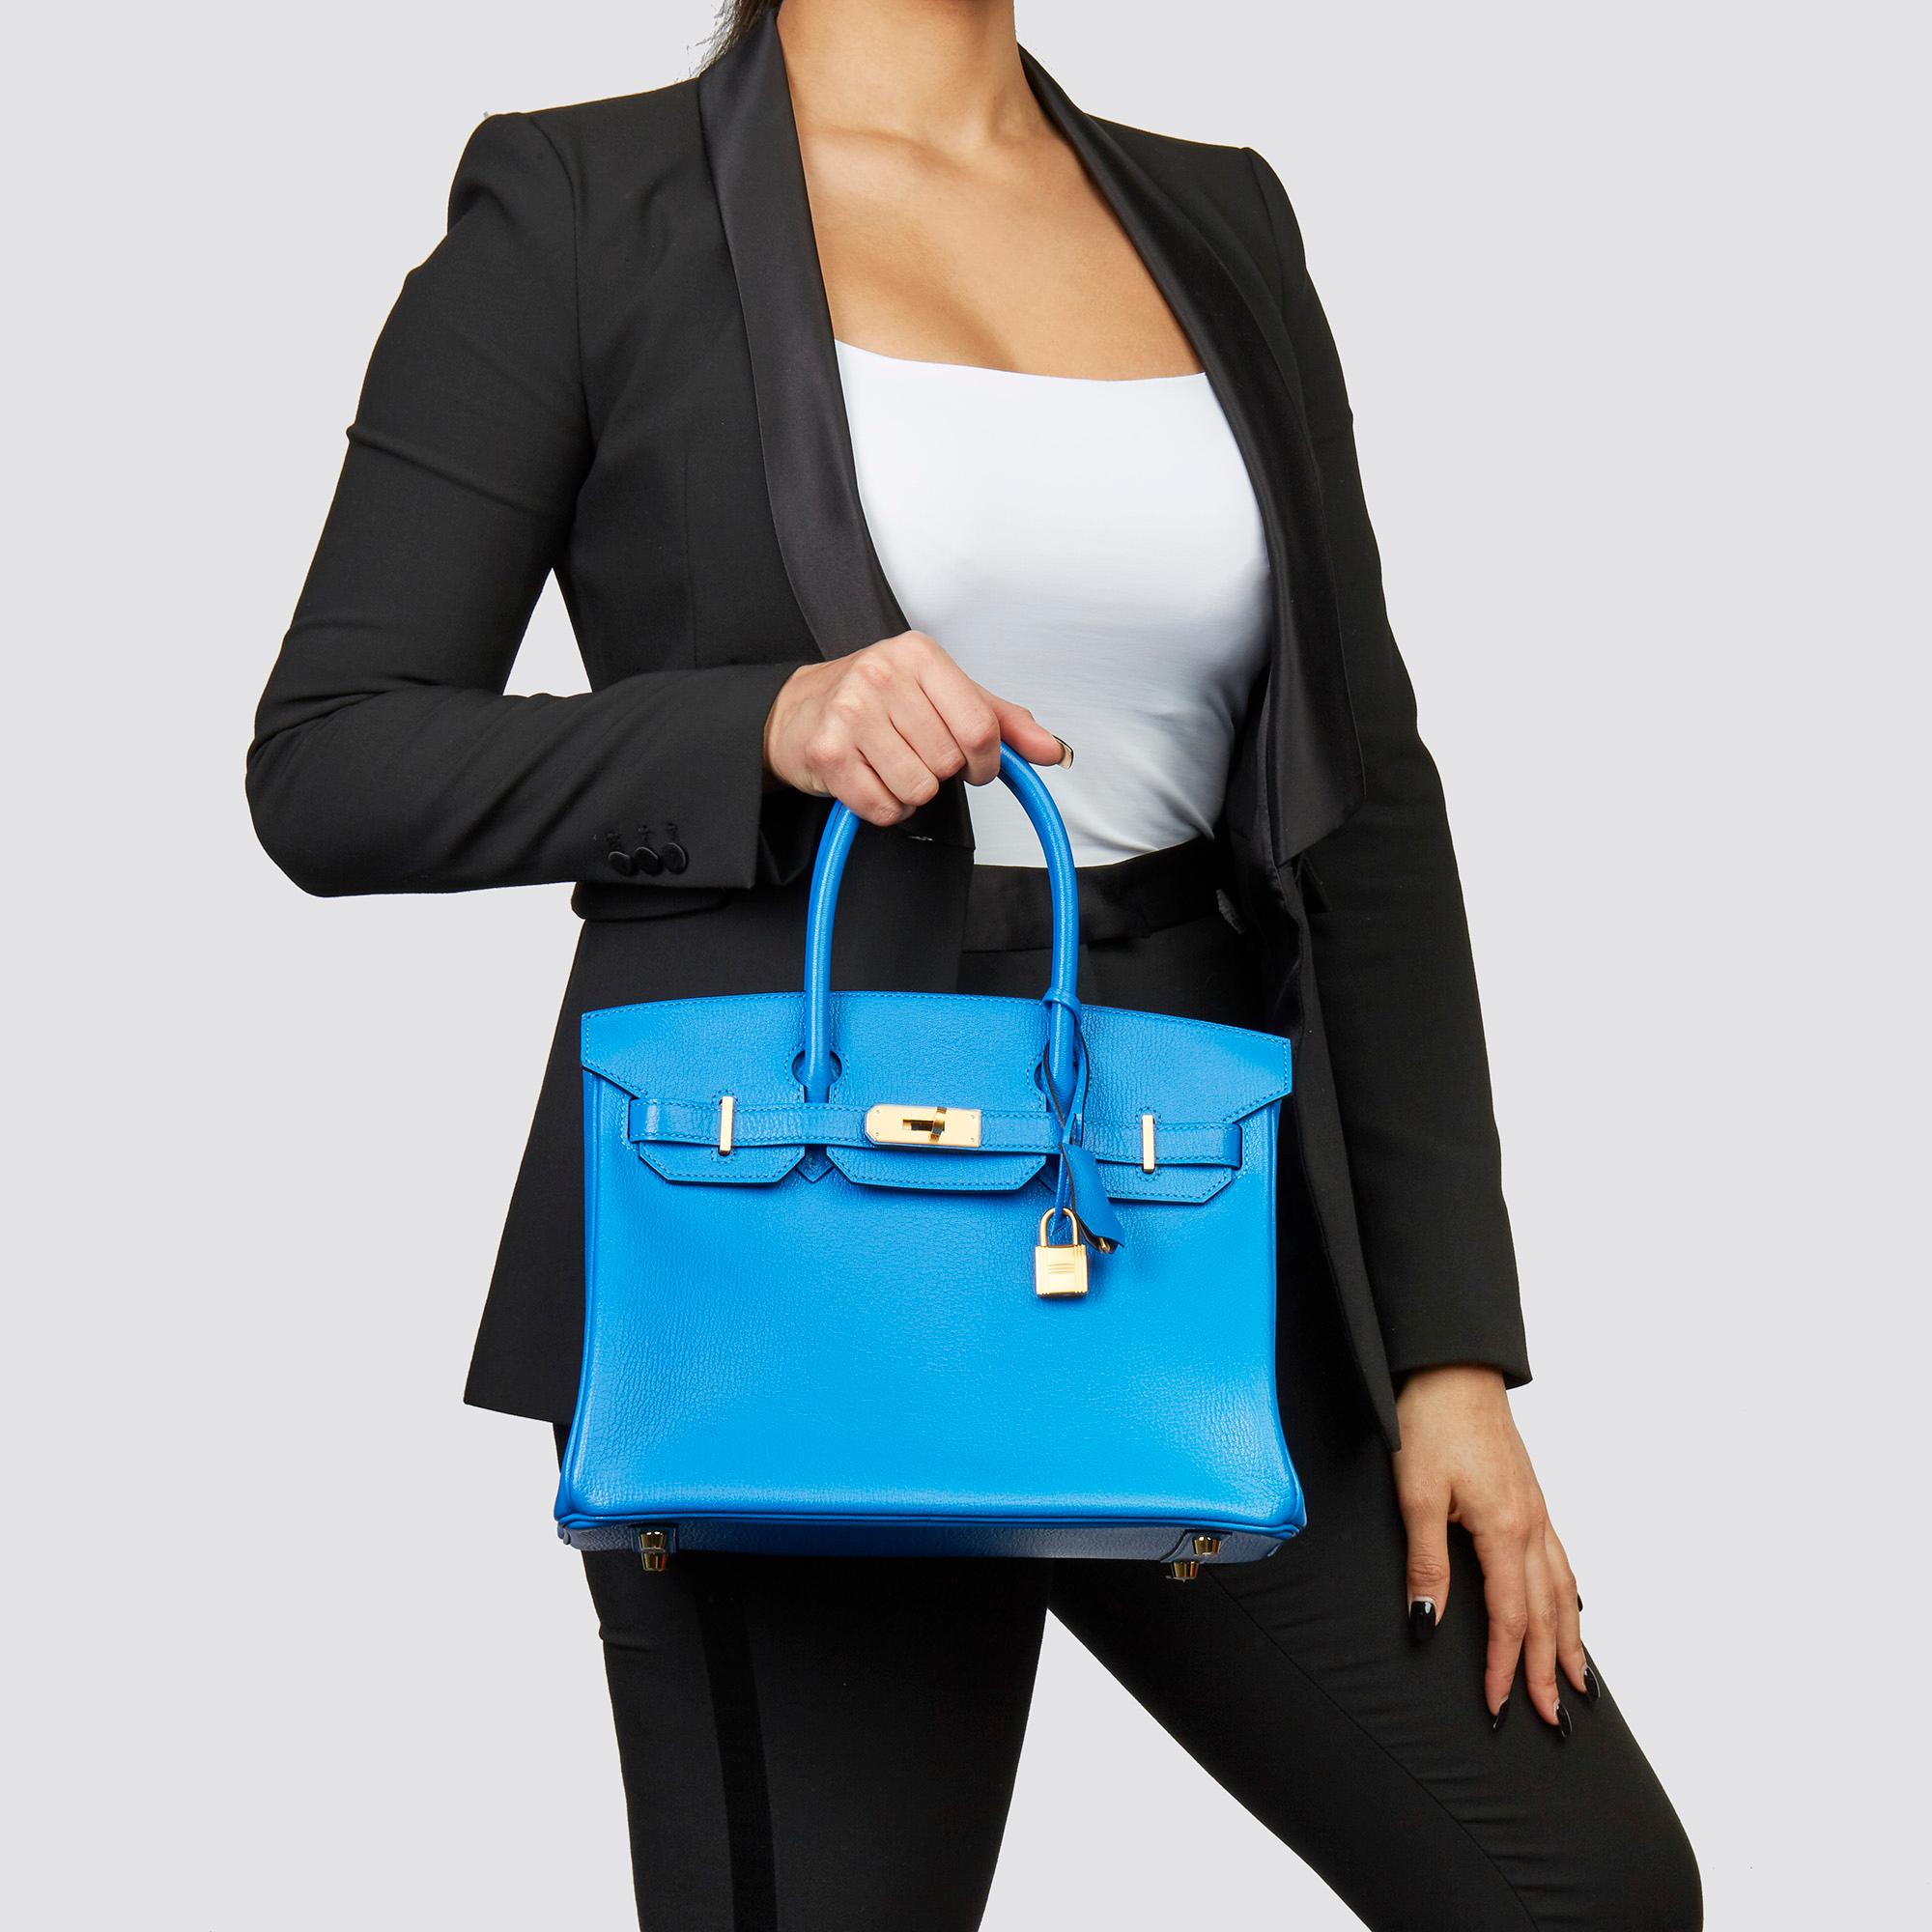 HERMÈS
Blue & Gris Mouette Chevre Mysore Leather  Special Order HSS Birkin 30cm

Xupes Reference: CB222
Serial Number: A
Age (Circa): 2017
Accompanied By: Hermès Dust Bag, Box, Lock, Keys, Clochette, Rain Cover, Care Booklet, Protective